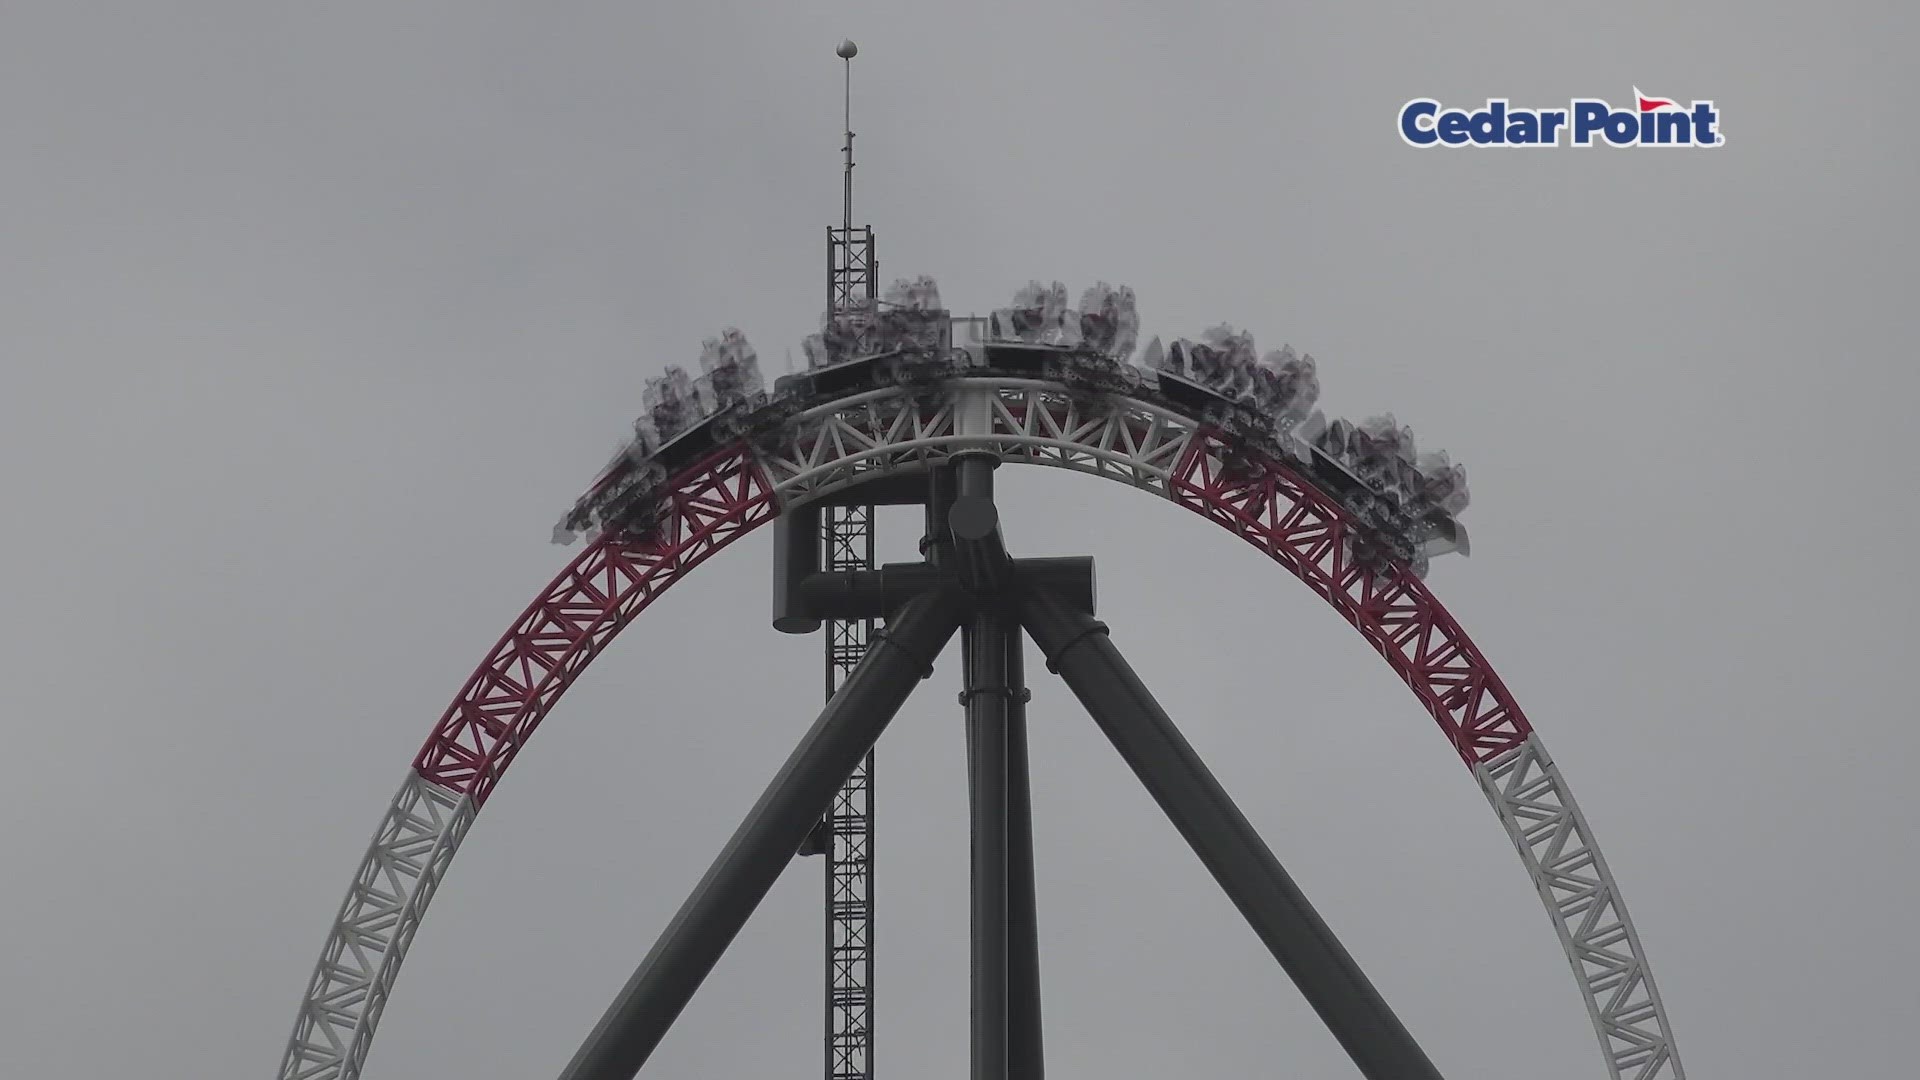 Top Thrill 2 is the tallest and fastest roller coaster at Cedar Point, featuring three high-speed launches between two 420-foot towers.